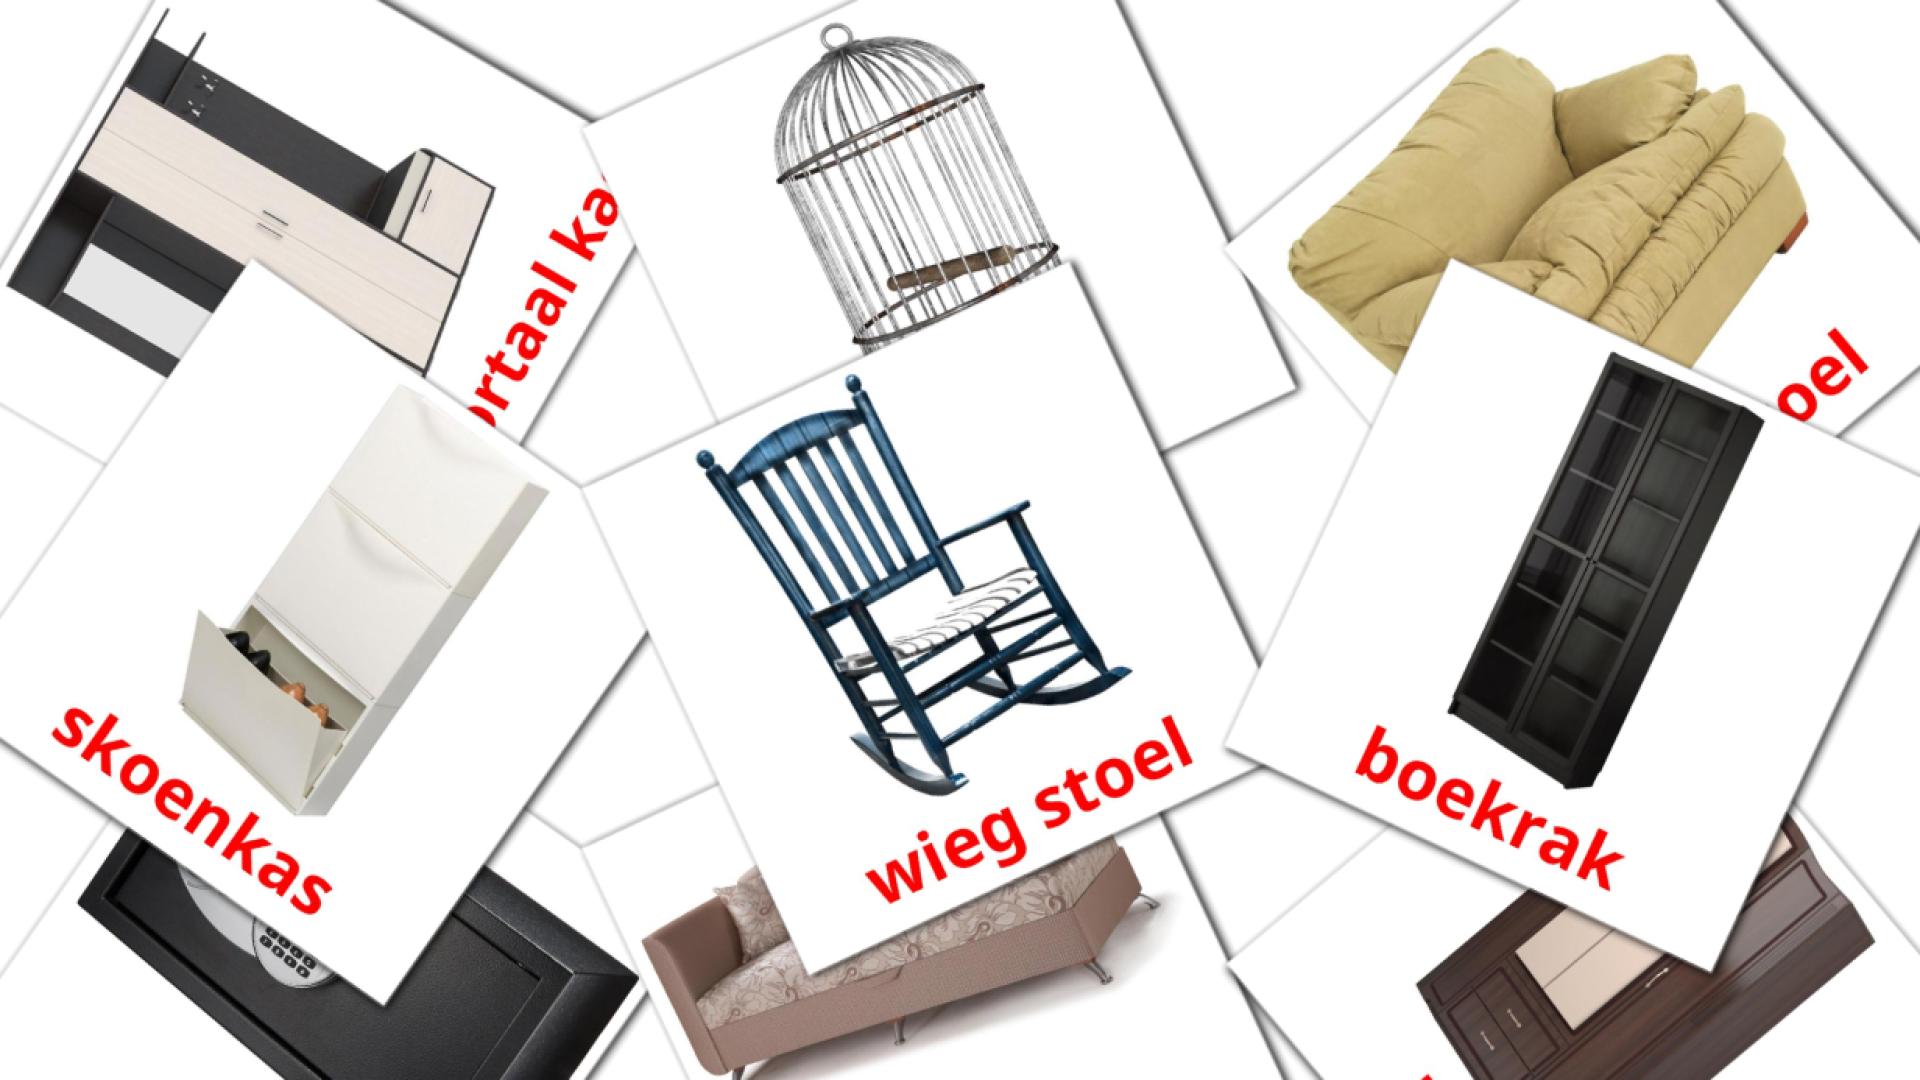 Furniture - afrikaans vocabulary cards